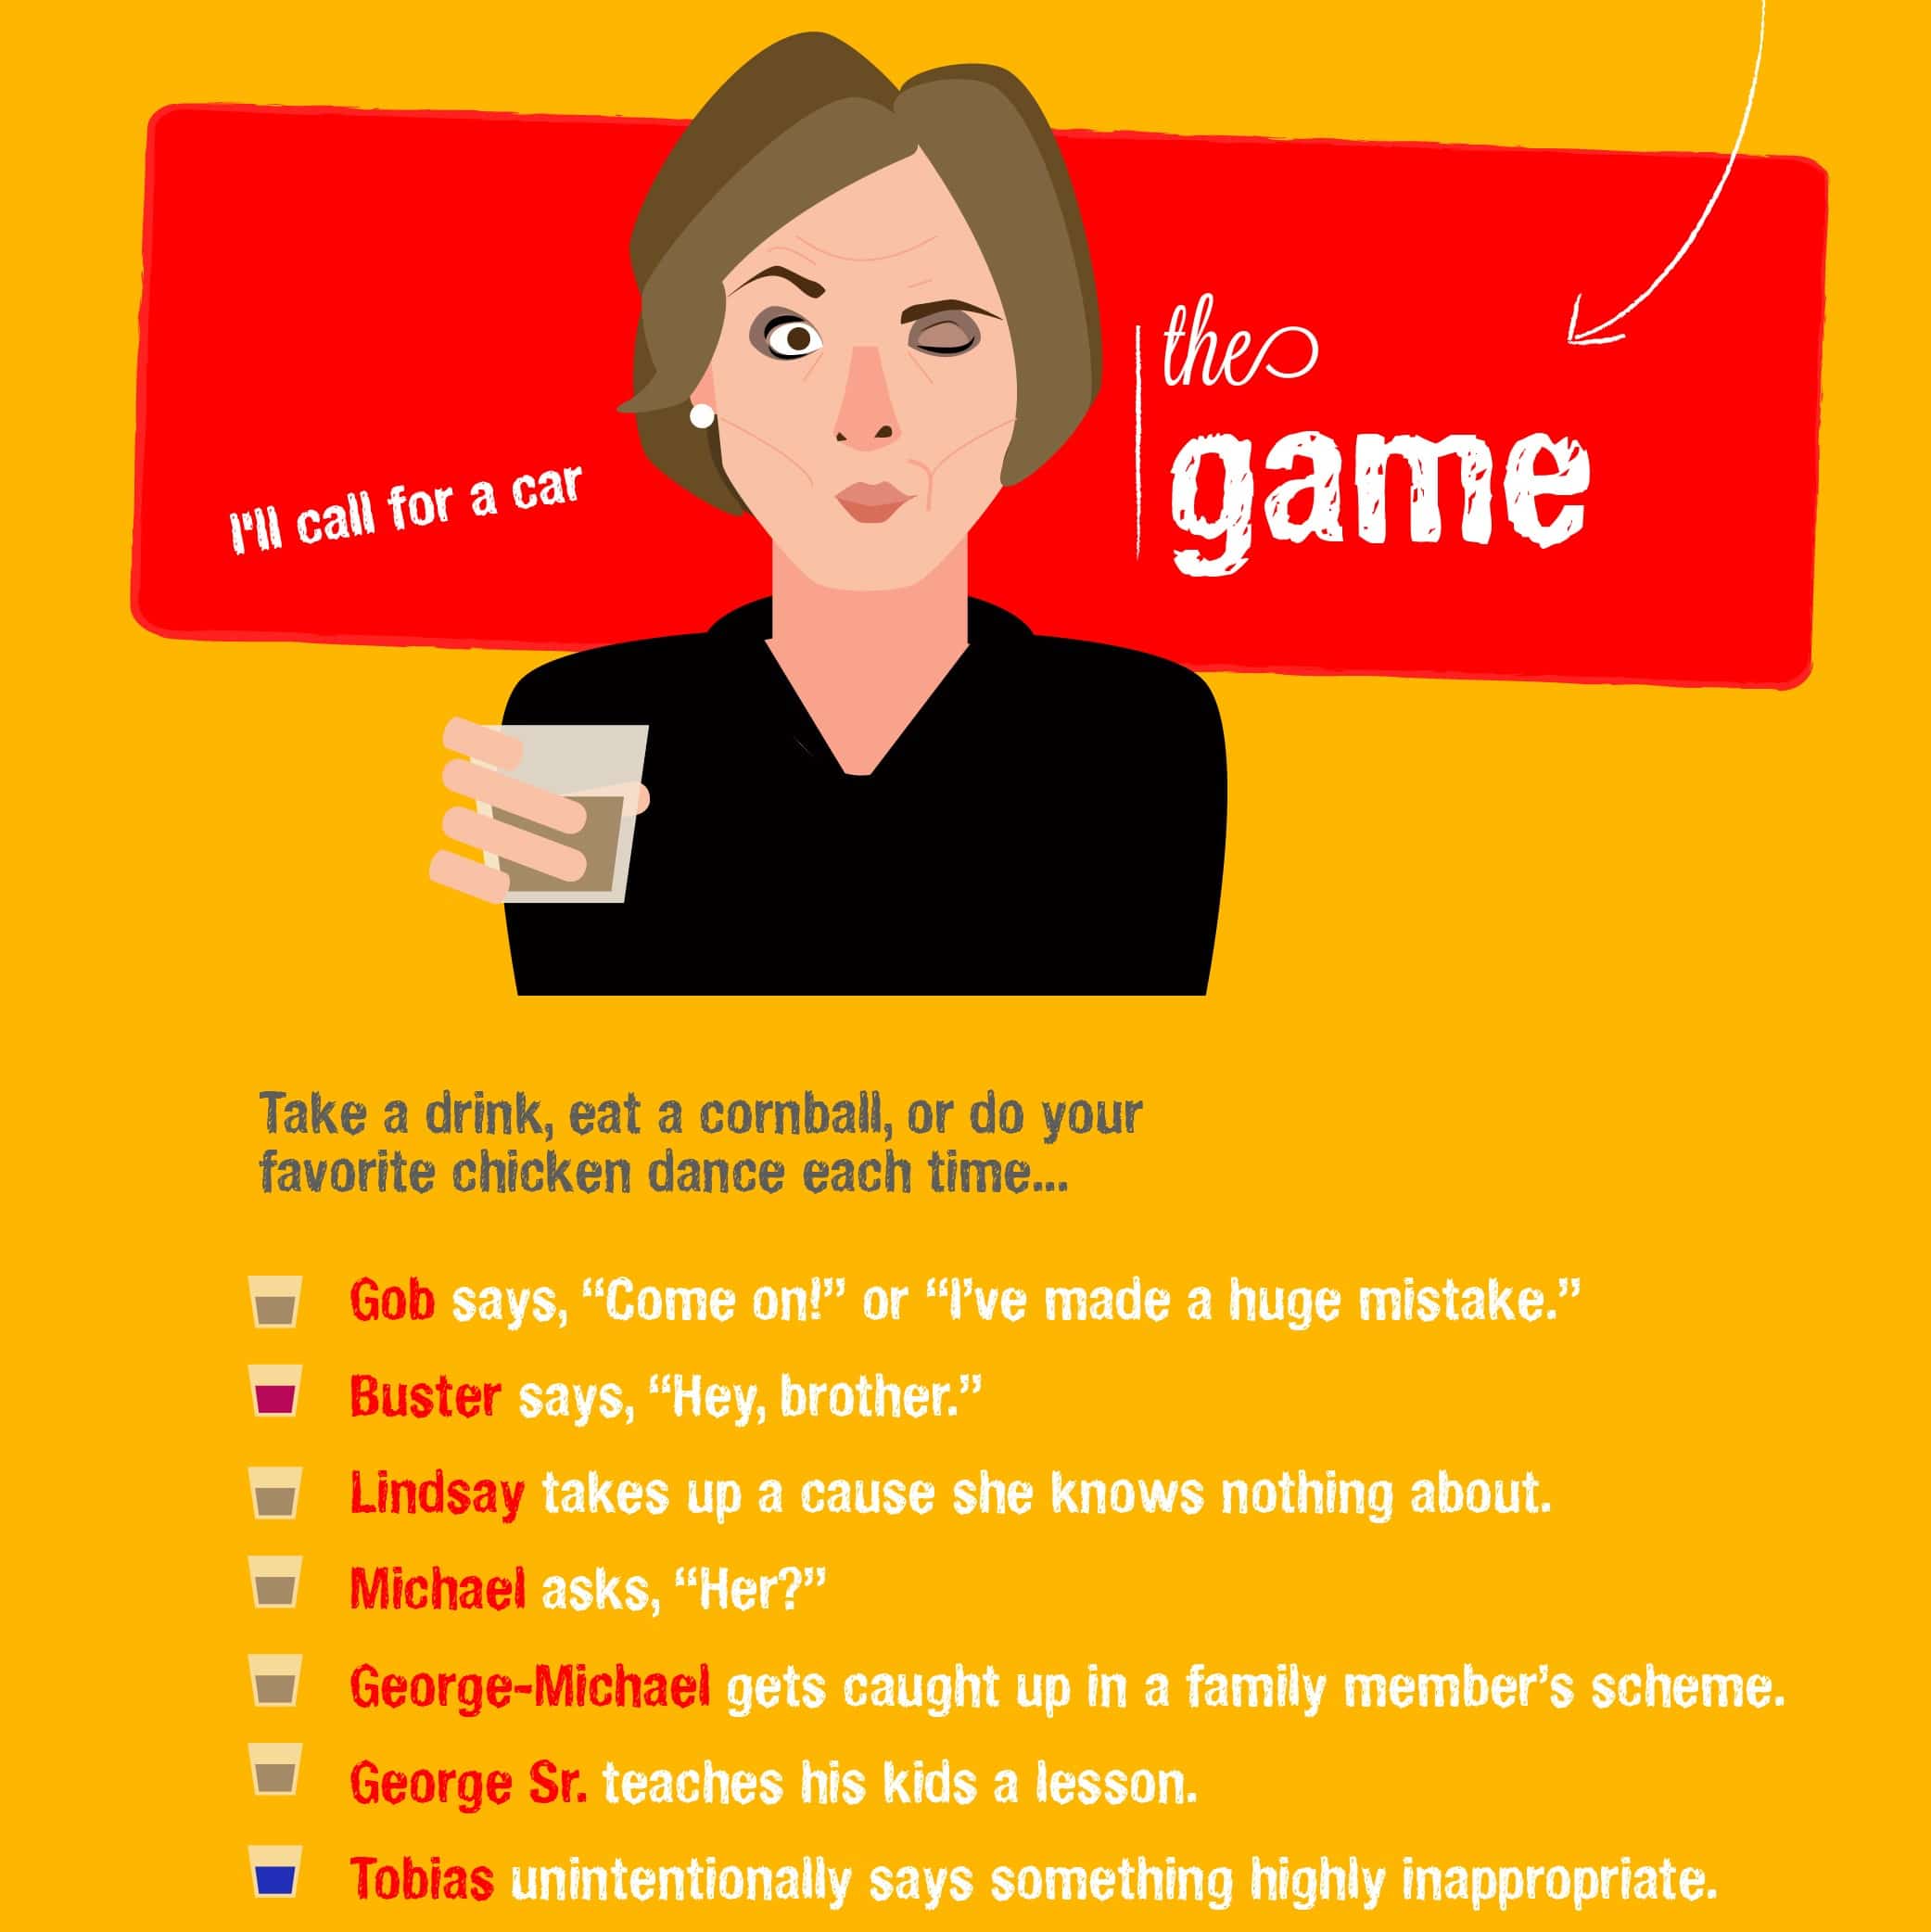 Thumbnail of Arrested Development infographic.